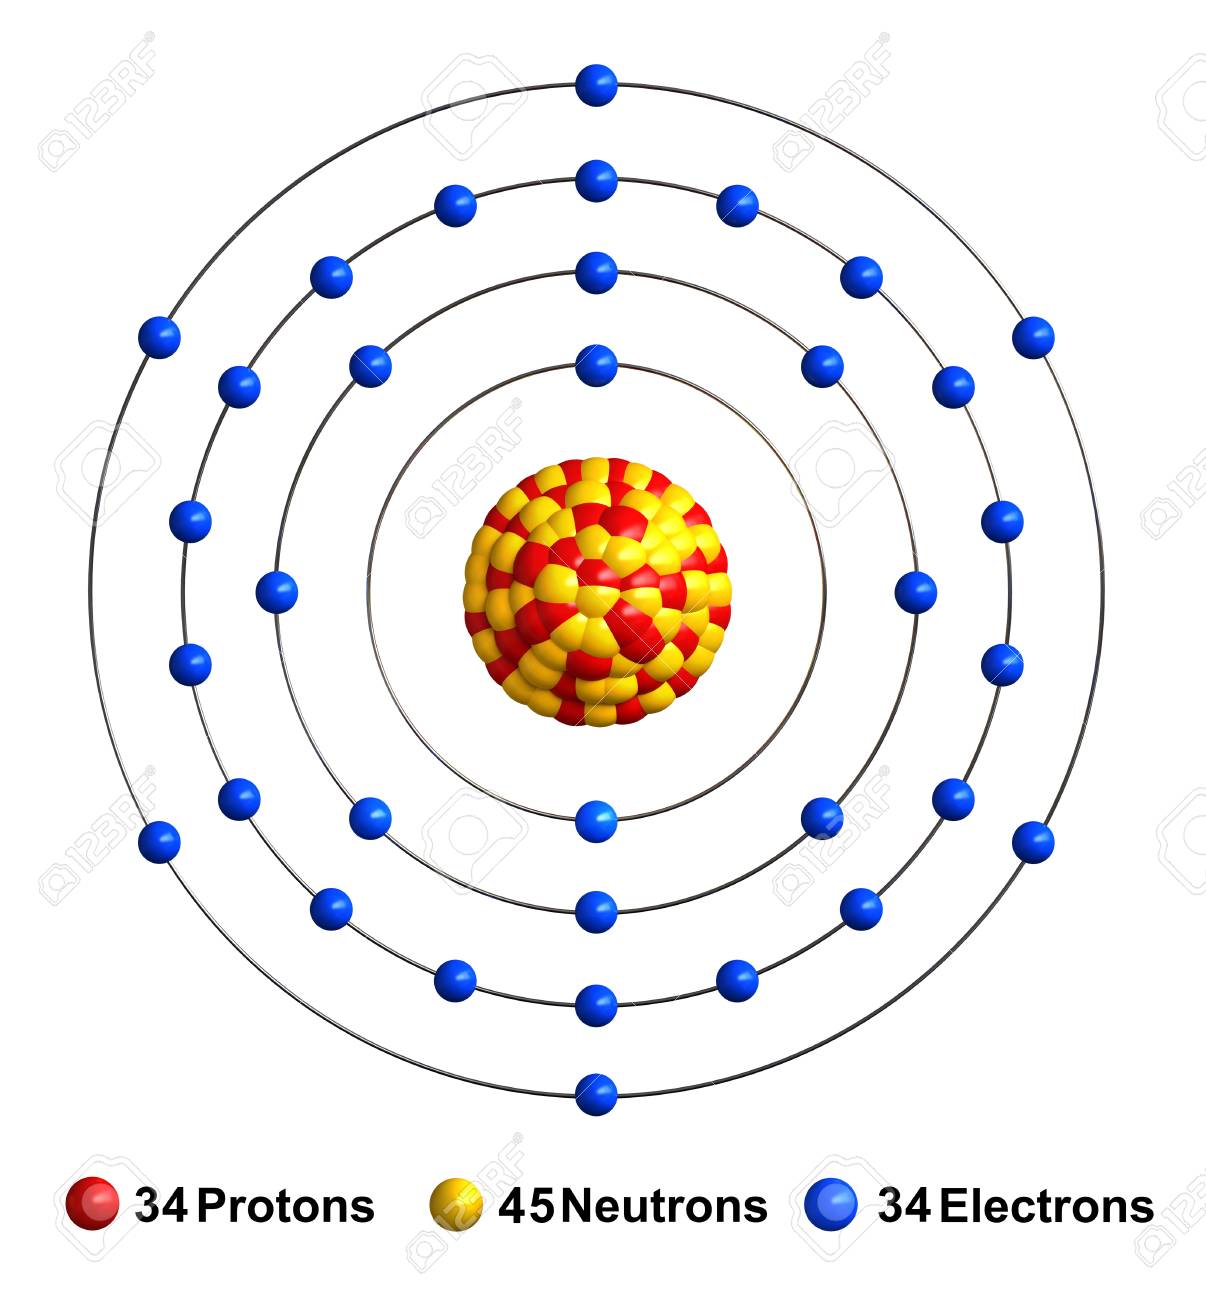 3d Render Of Atom Structure Of Selenium Isolated Over White Background  Protons Are Represented As Red Spheres, Neutron As Yellow Spheres,  Electrons As Blue Spheres Stock Photo, Picture And Royalty Free Image.